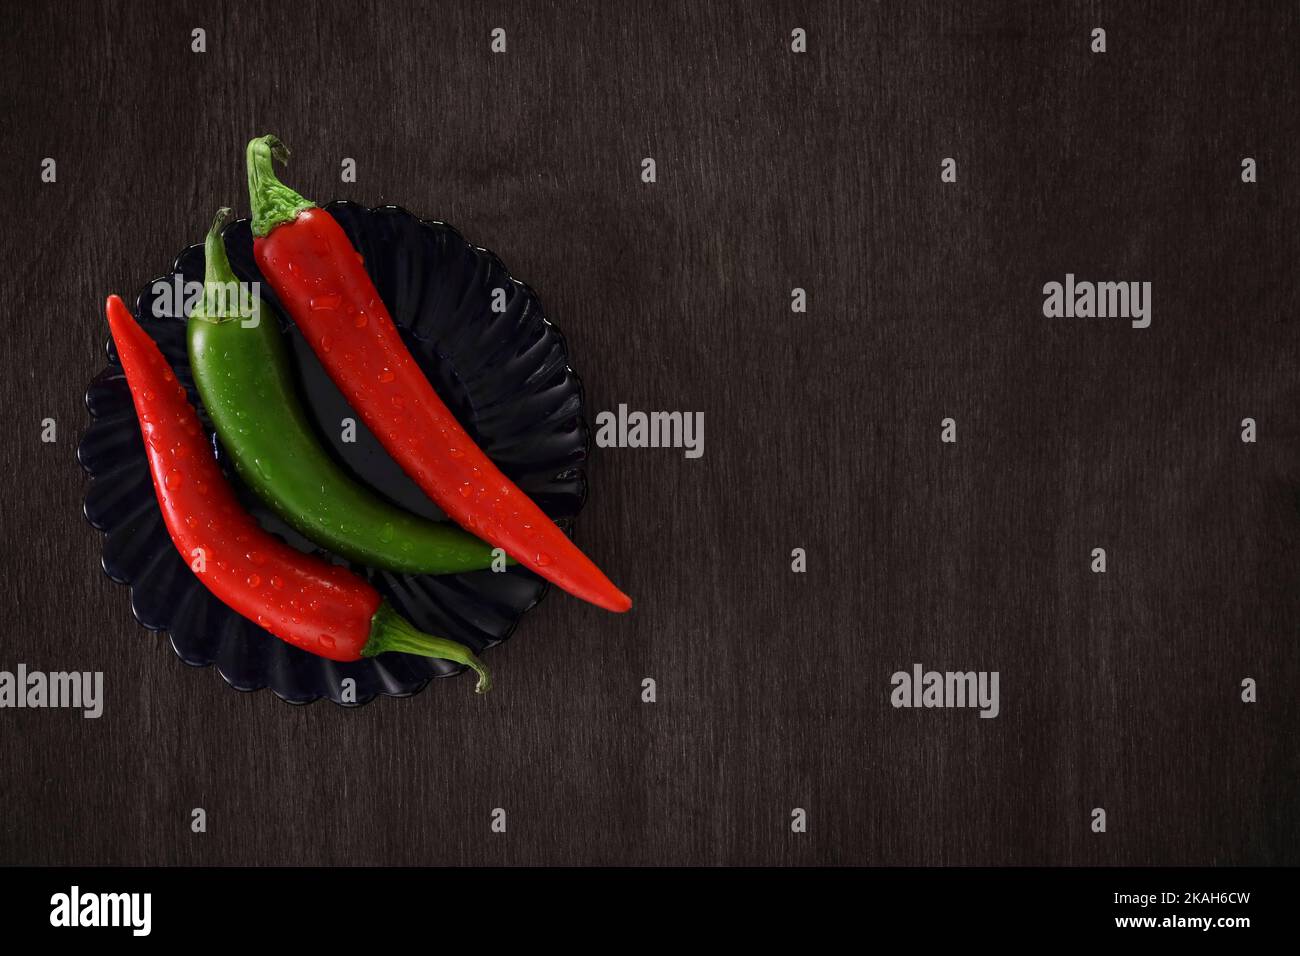 Stinging chili peppers on a black wooden background. Copy space for text. Stock Photo